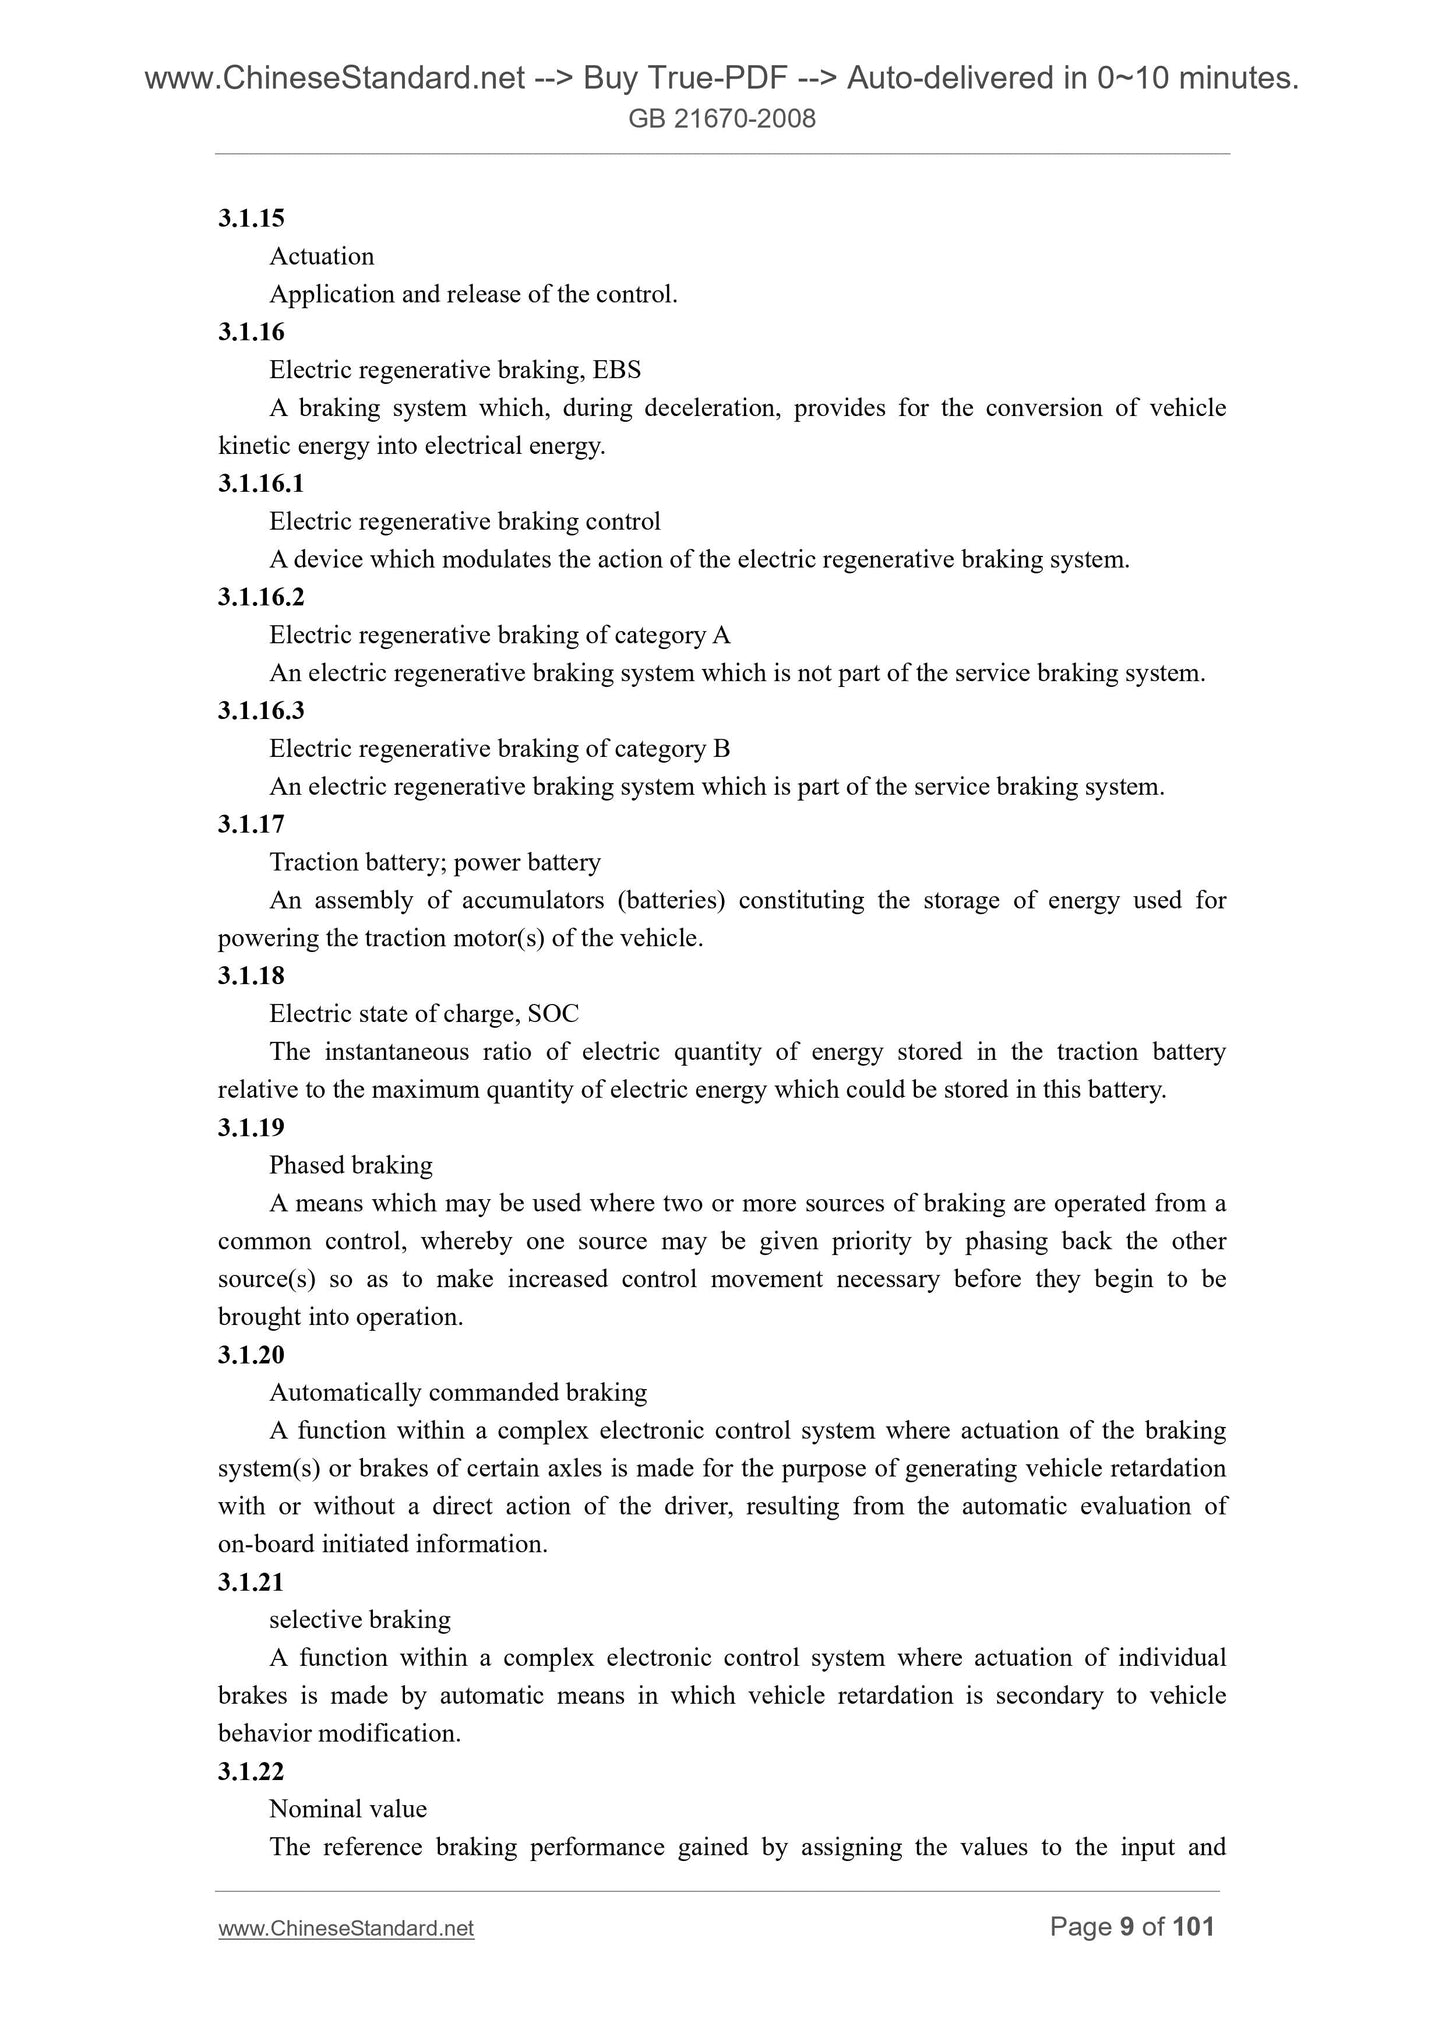 GB 21670-2008 Page 6